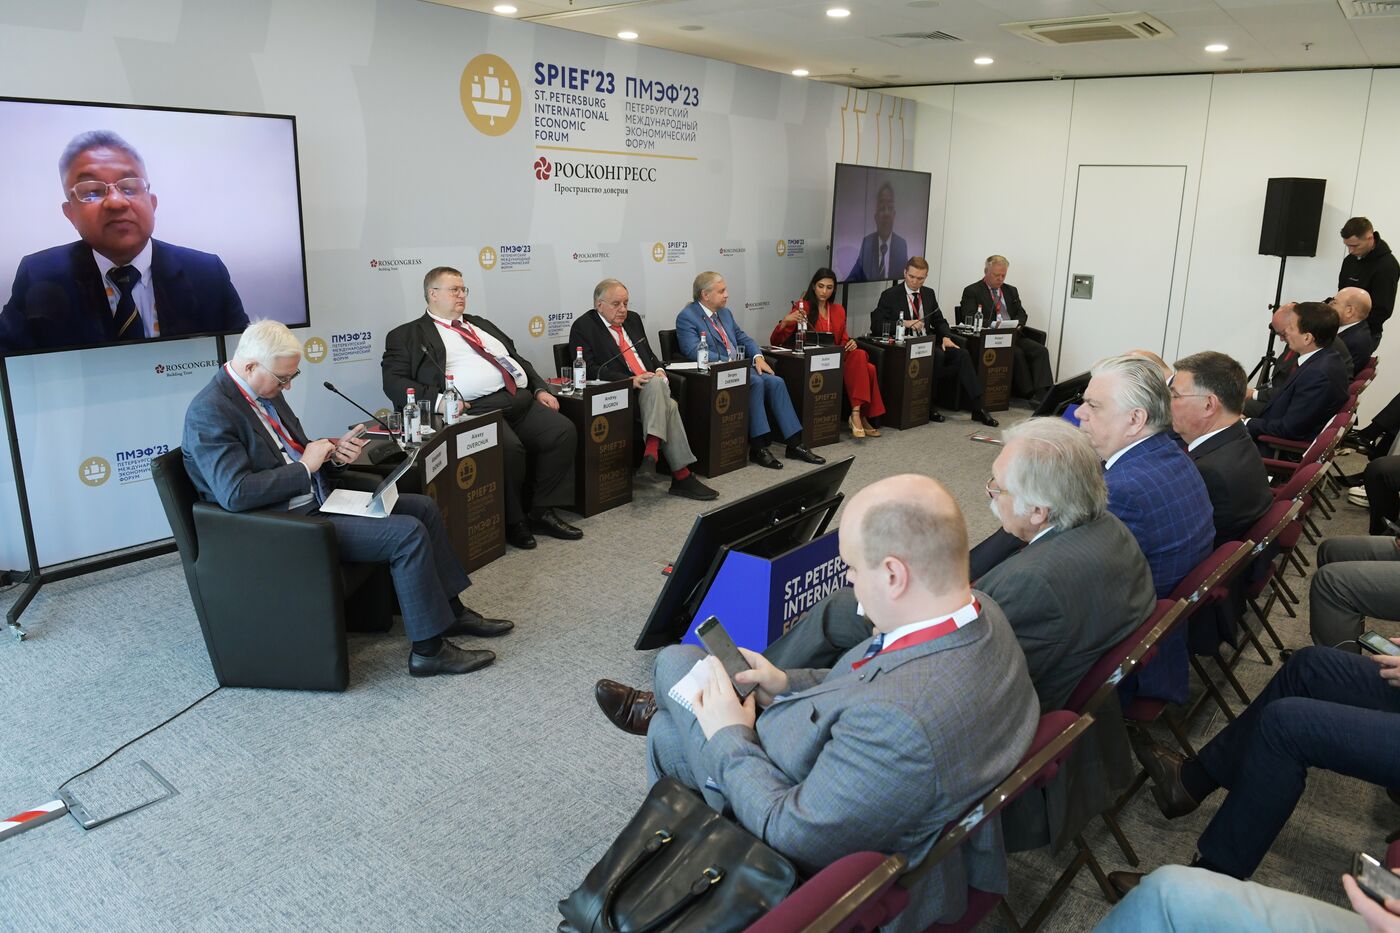 SPIEF-2023. B20 Regional Consultation Forum. Moving South: Effective Development in the New World